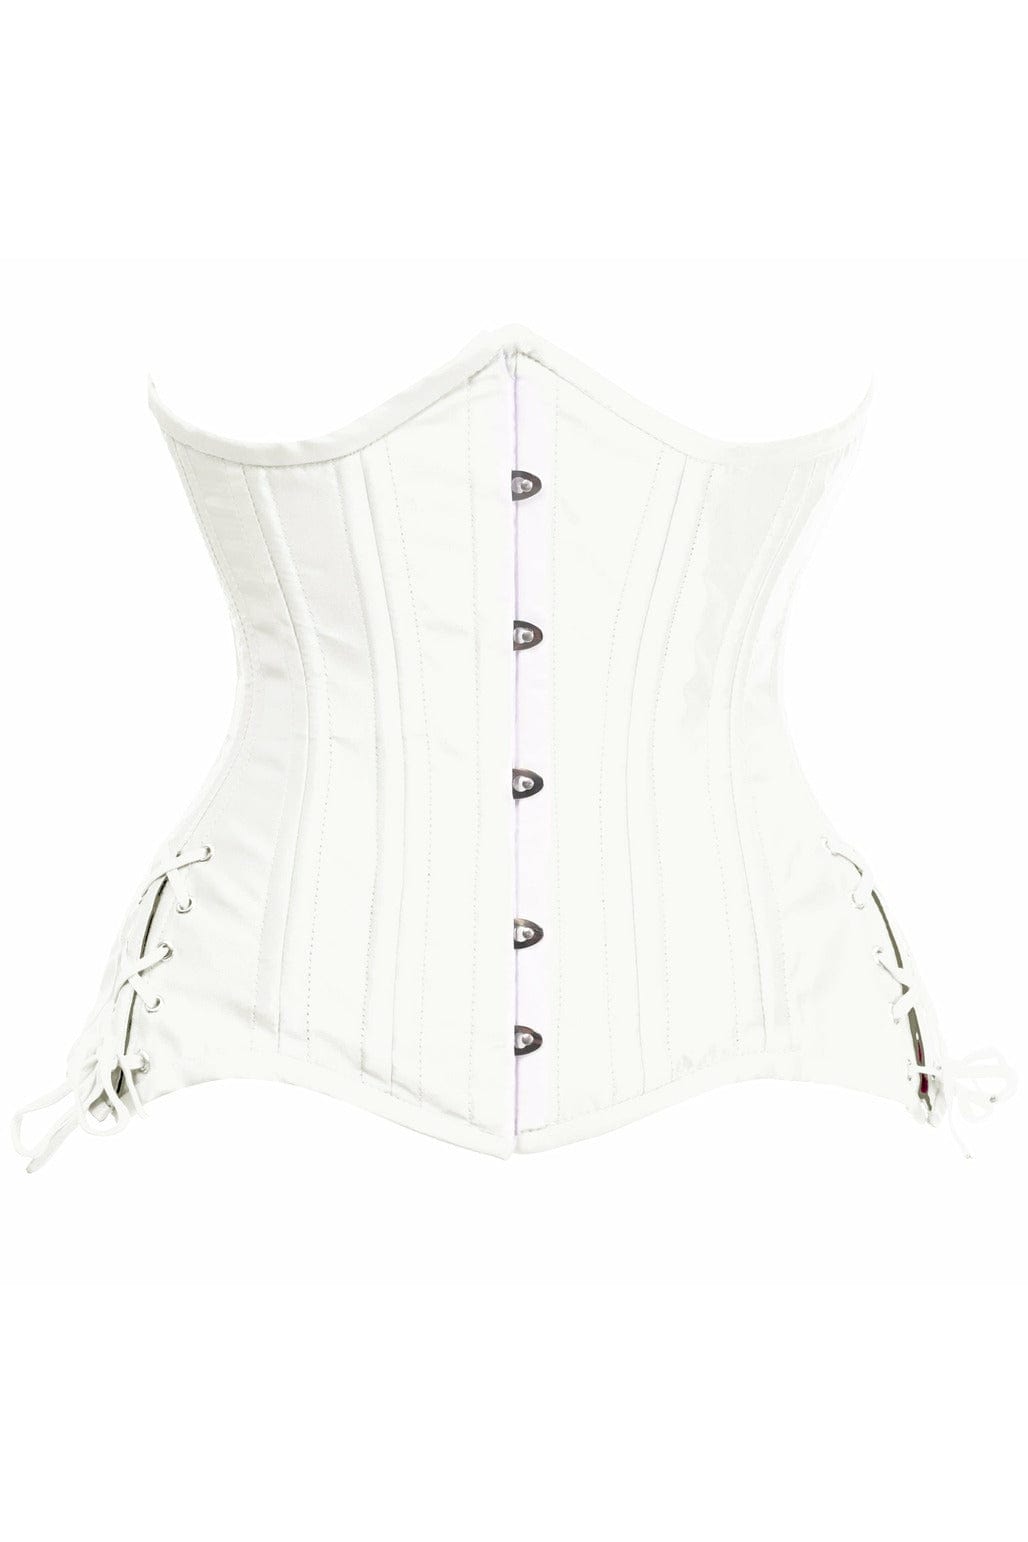 Deluxe White Satin Double Steel Boned Curvy Cut Waist Cincher Corset with Lace-Up Sides Musotica.com